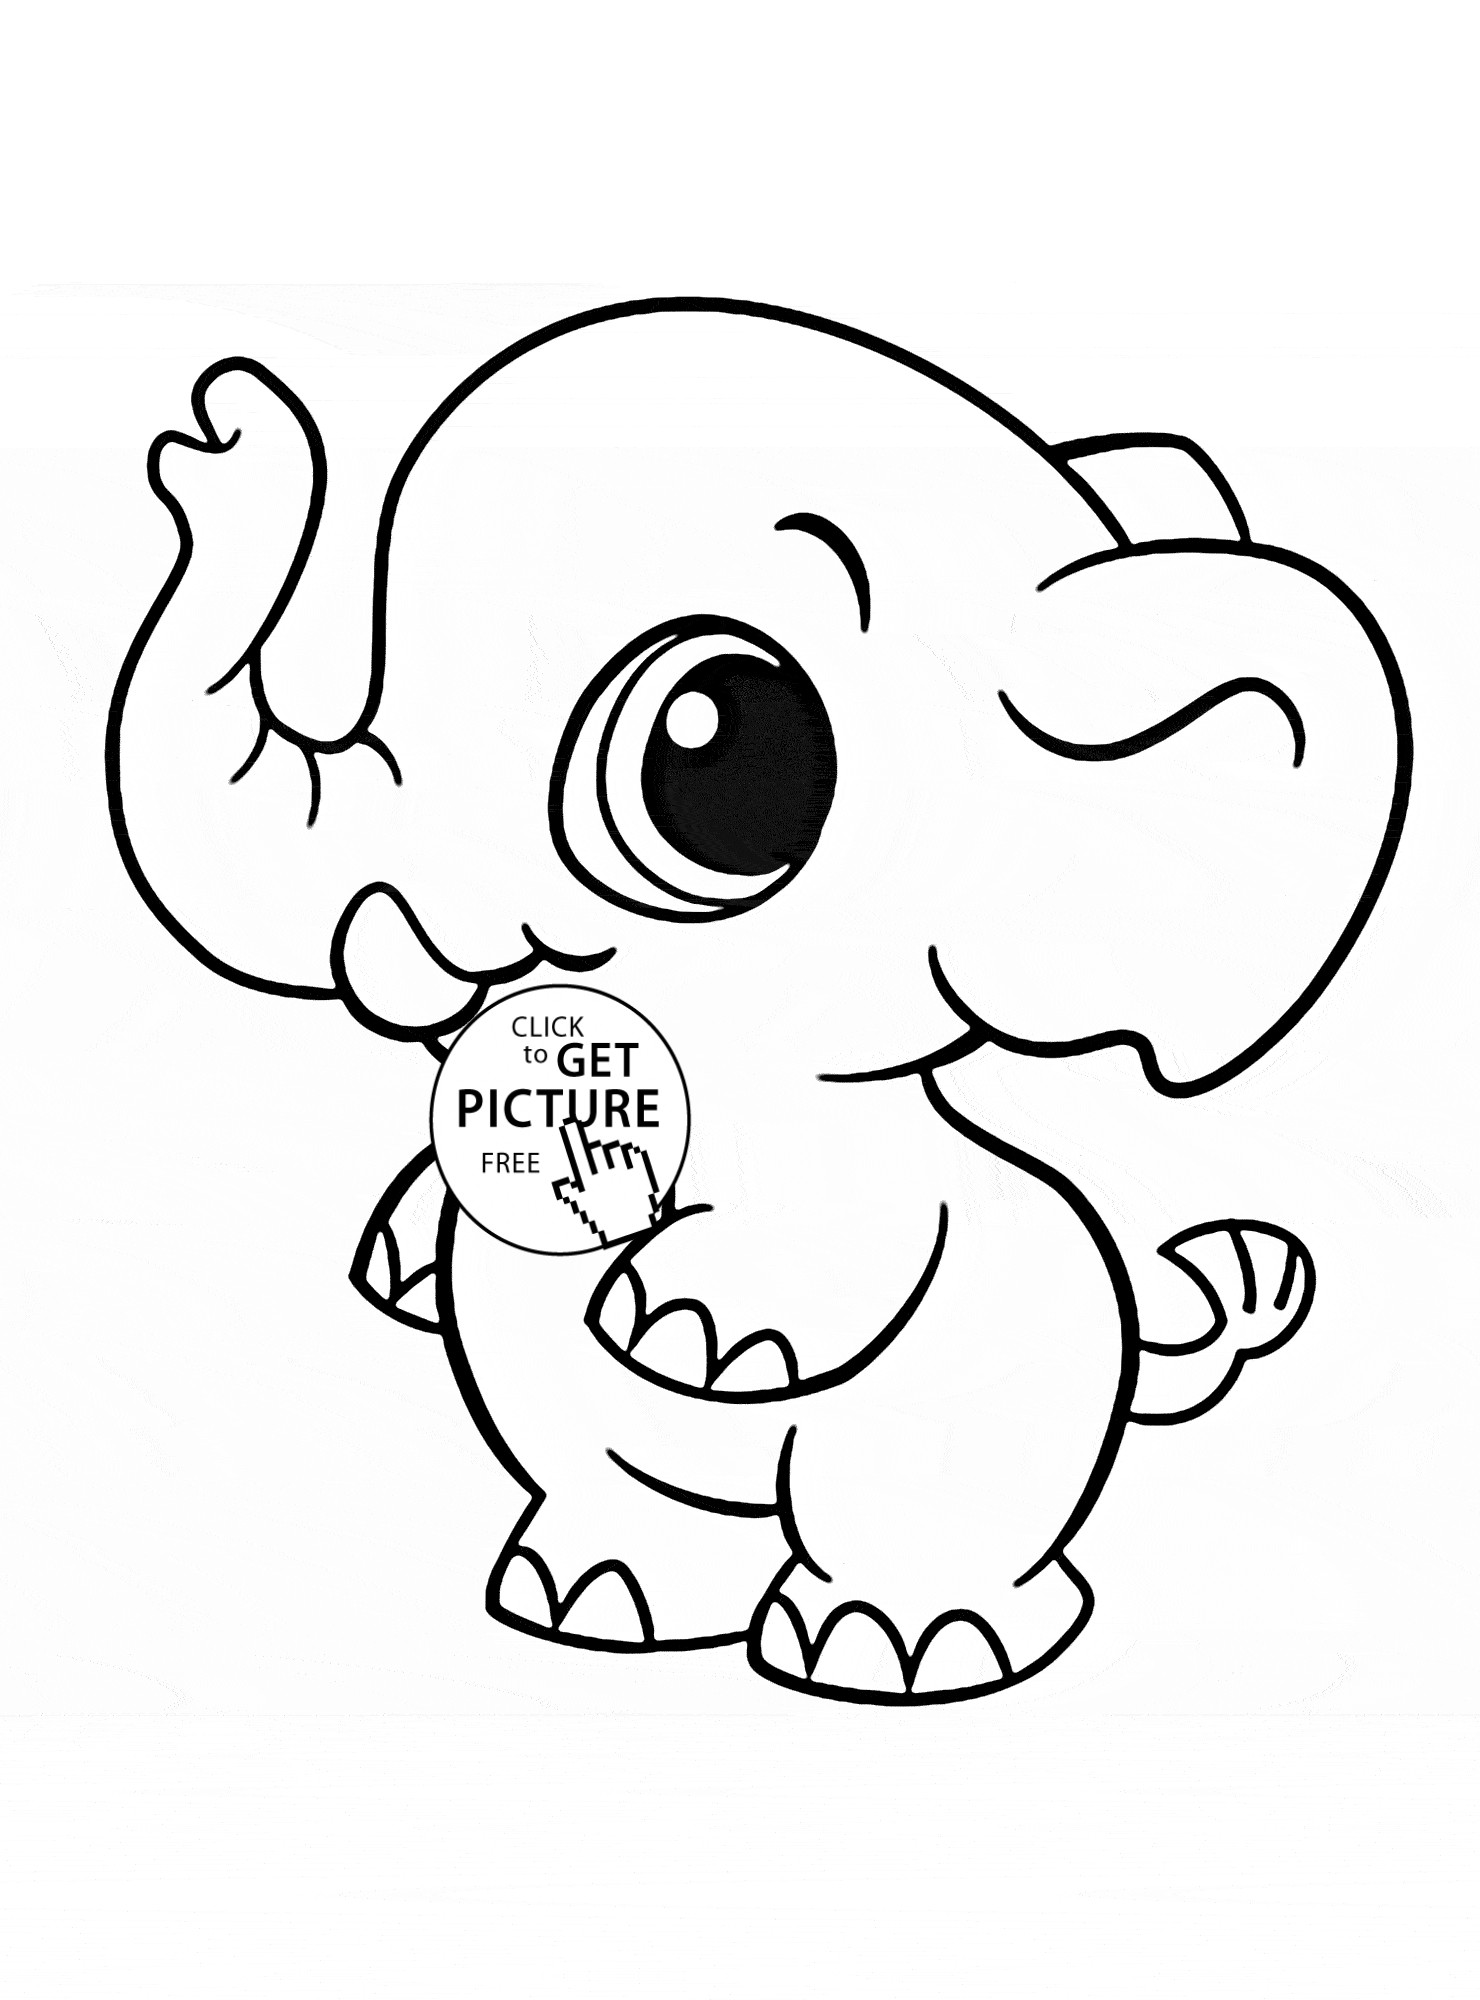 Cute Animals with Big Eyes Coloring Pages